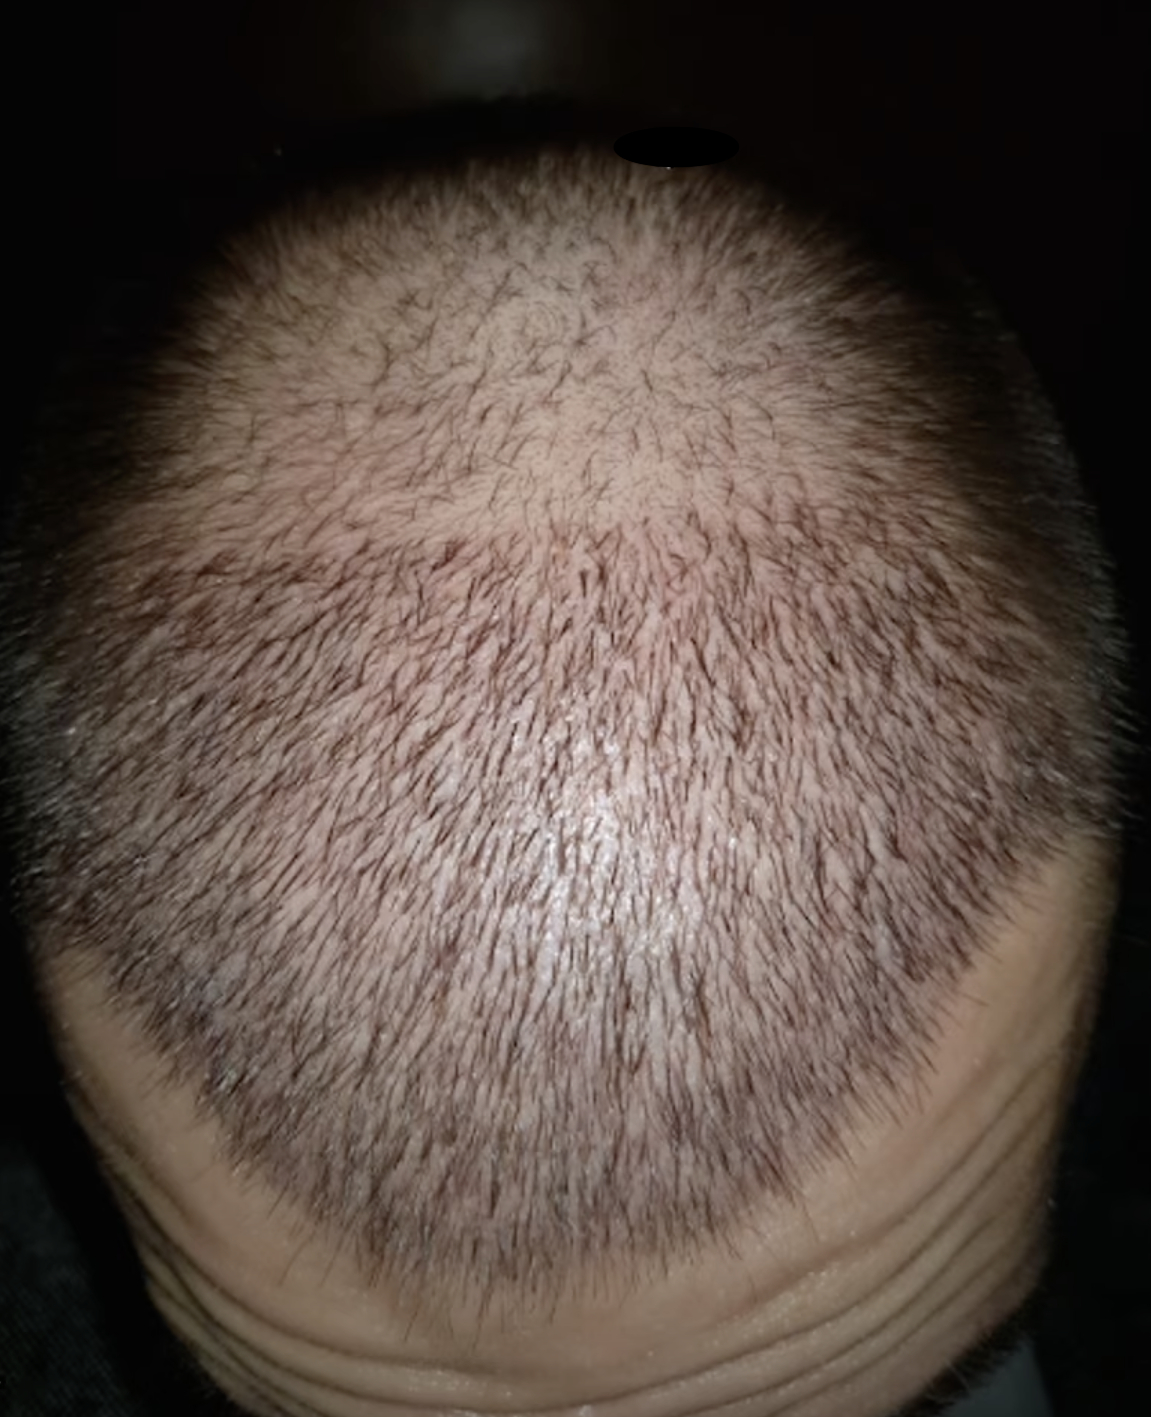 20 days after FUE hair transplant surgery